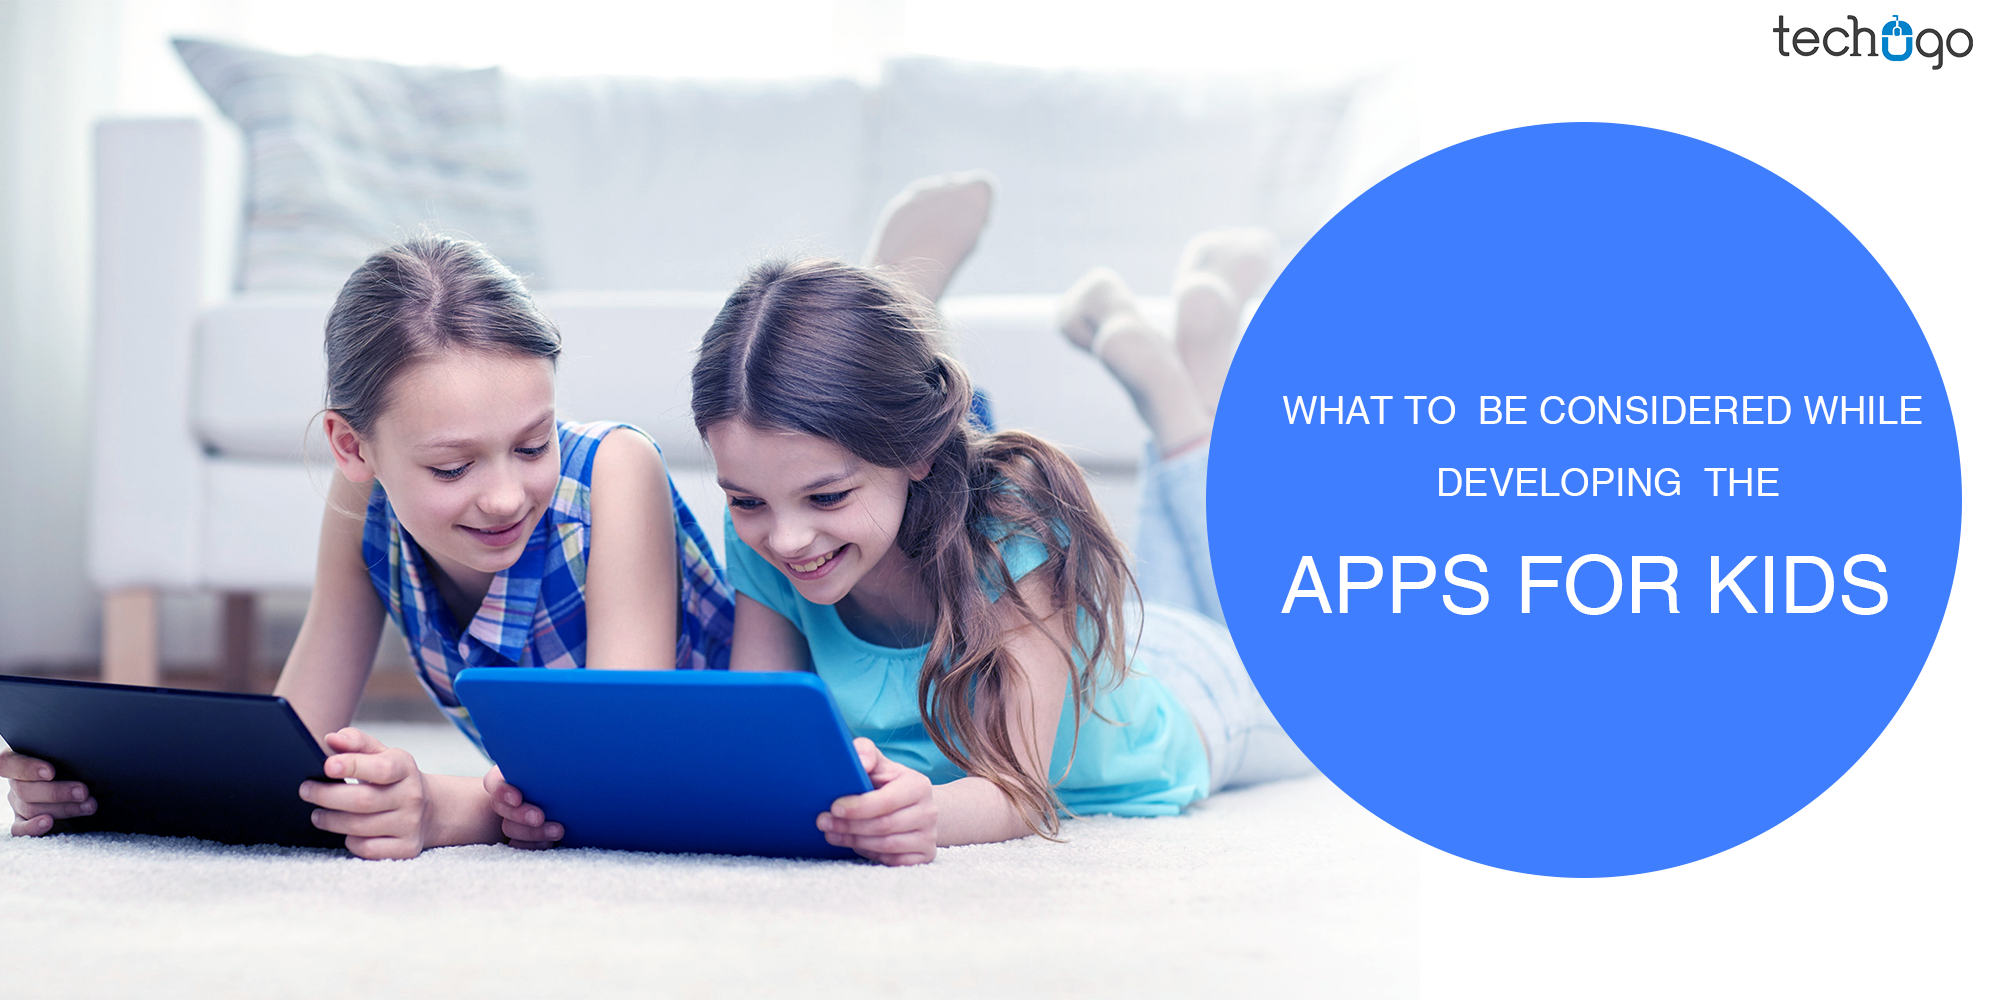 What To Be Considered While Developing The Apps For Kids